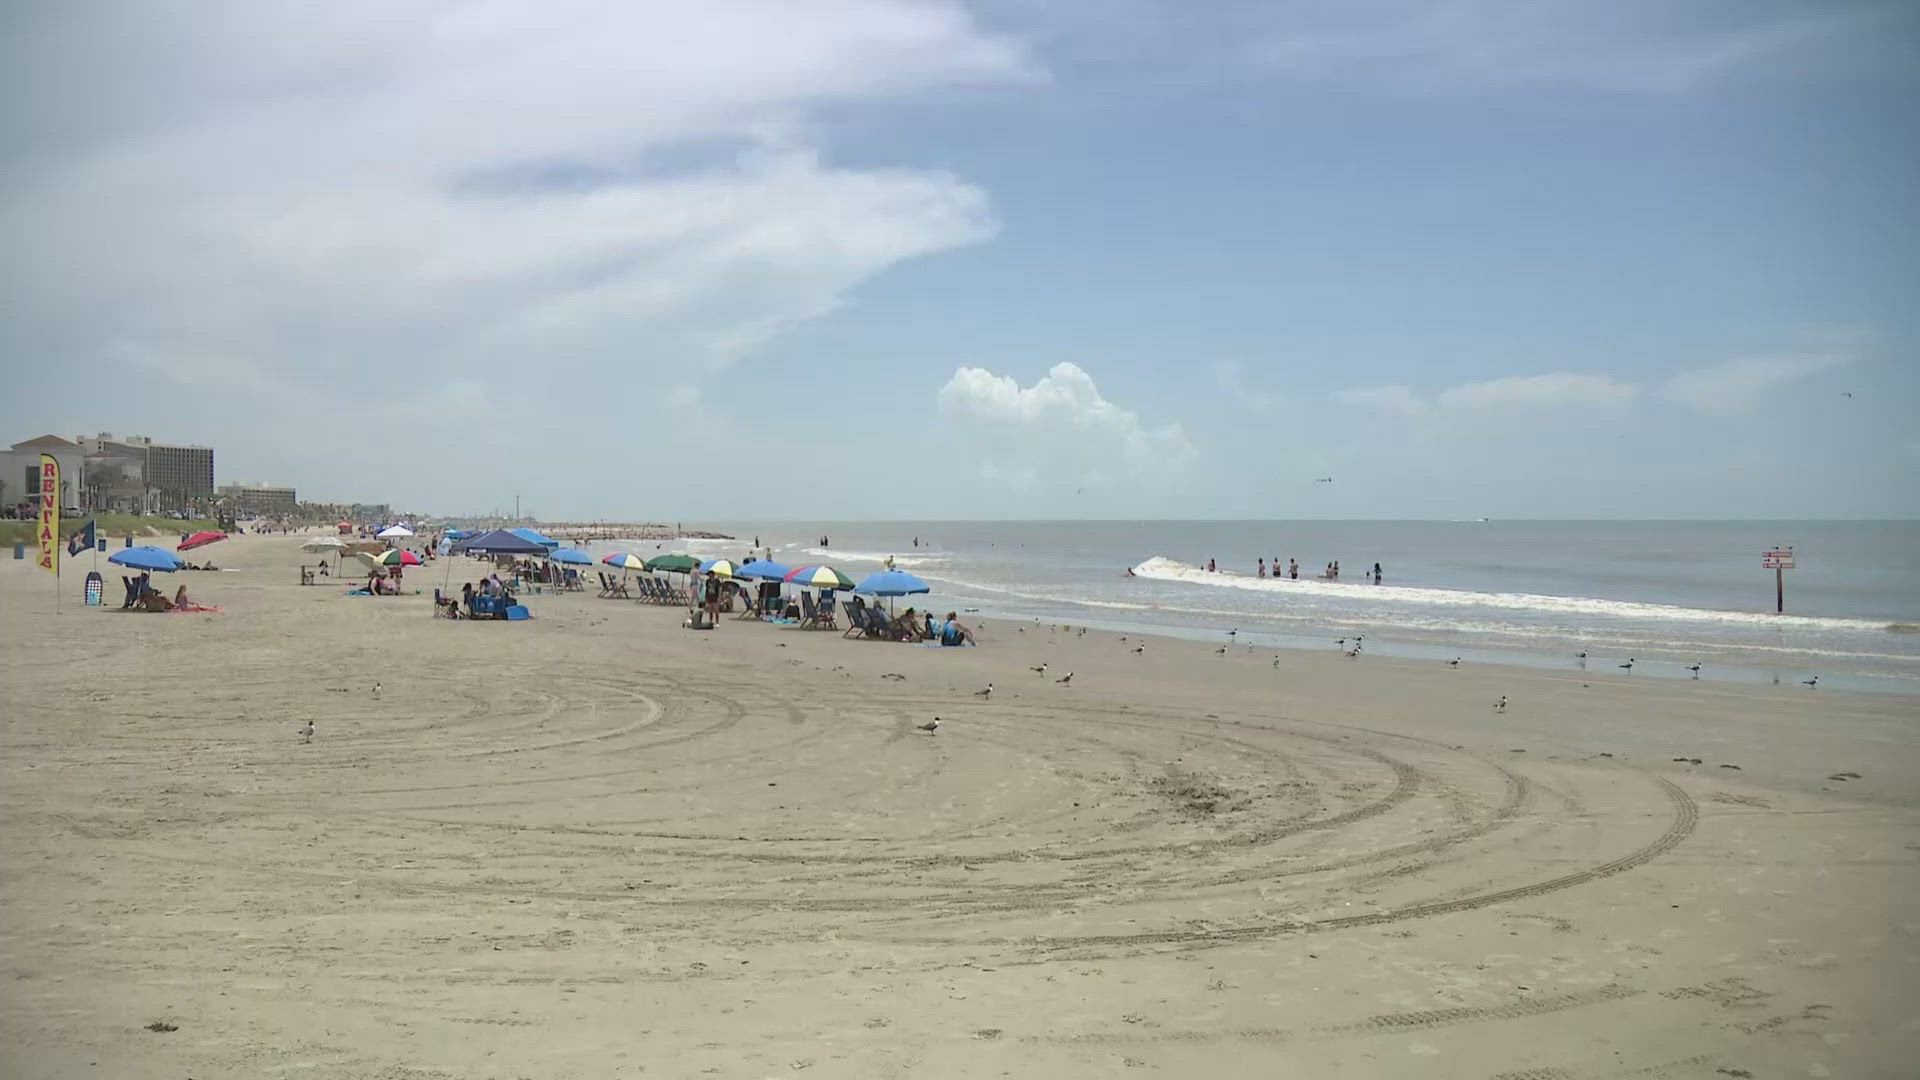 People visiting Galveston Island are encouraged to keep an eye on water conditions during the Fourth of July and beyond.